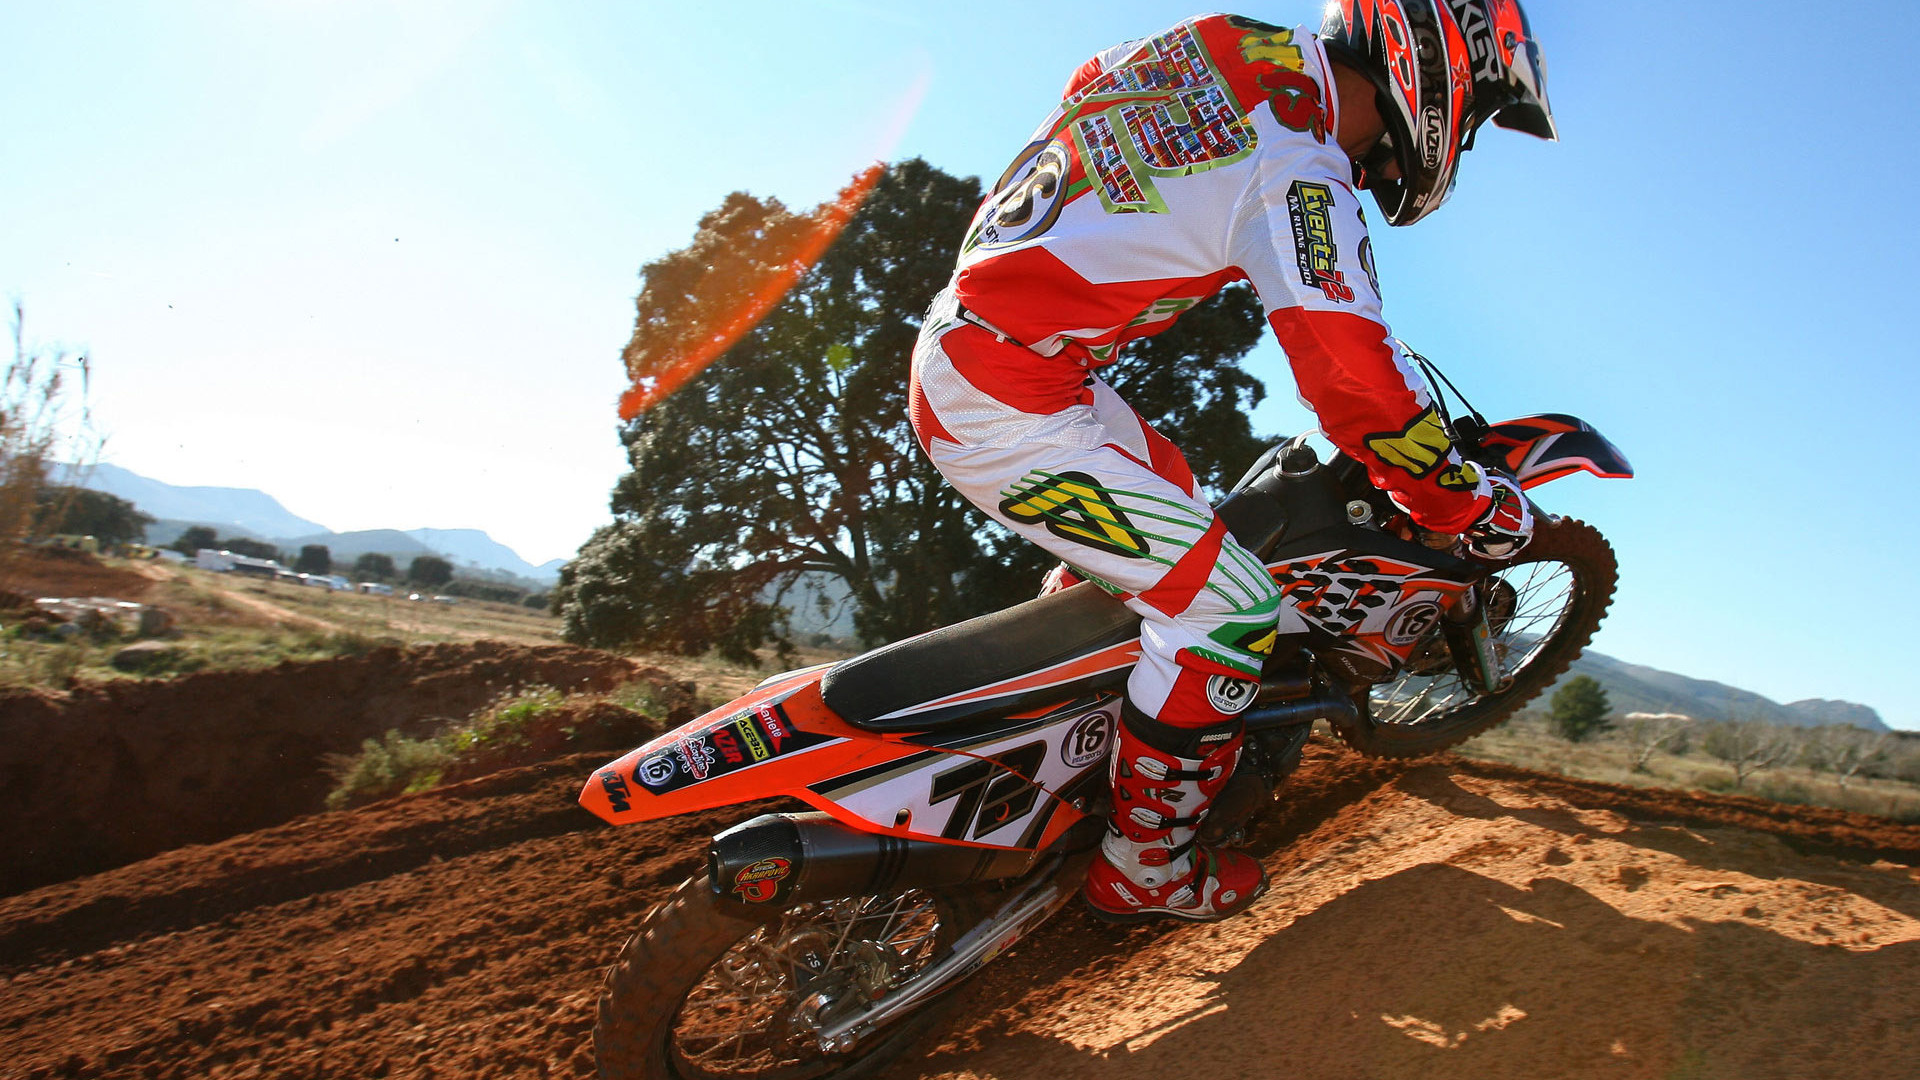 Motocross: Special Protective Gear, Cross-Сountry Driving, AMA Pro Racing. 1920x1080 Full HD Wallpaper.